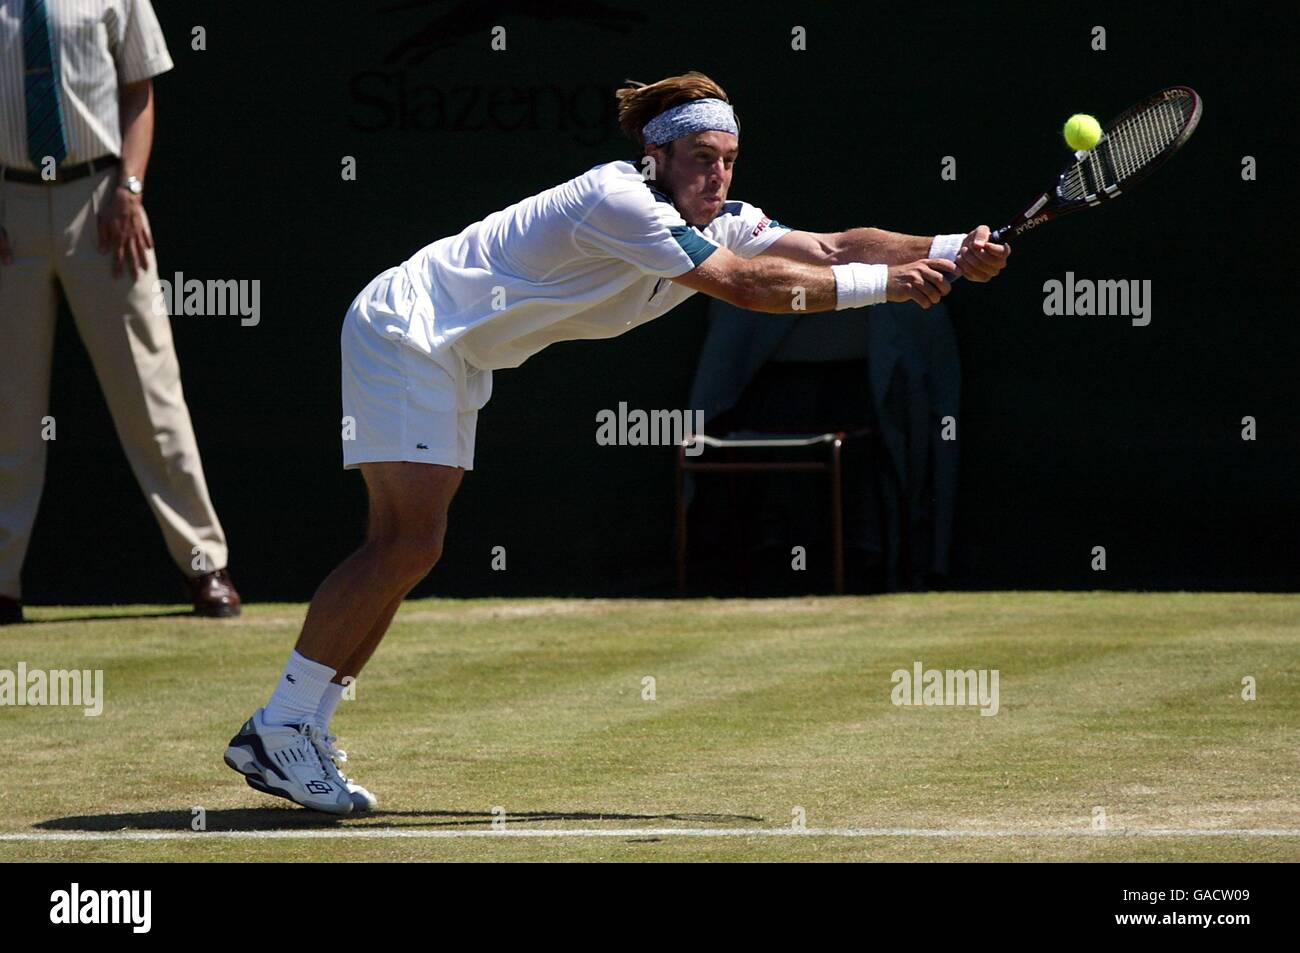 Tennis - Wimbledon 2002 - Second Round. George Bastl lunges for the ball on the base line against Pete Sampras Stock Photo